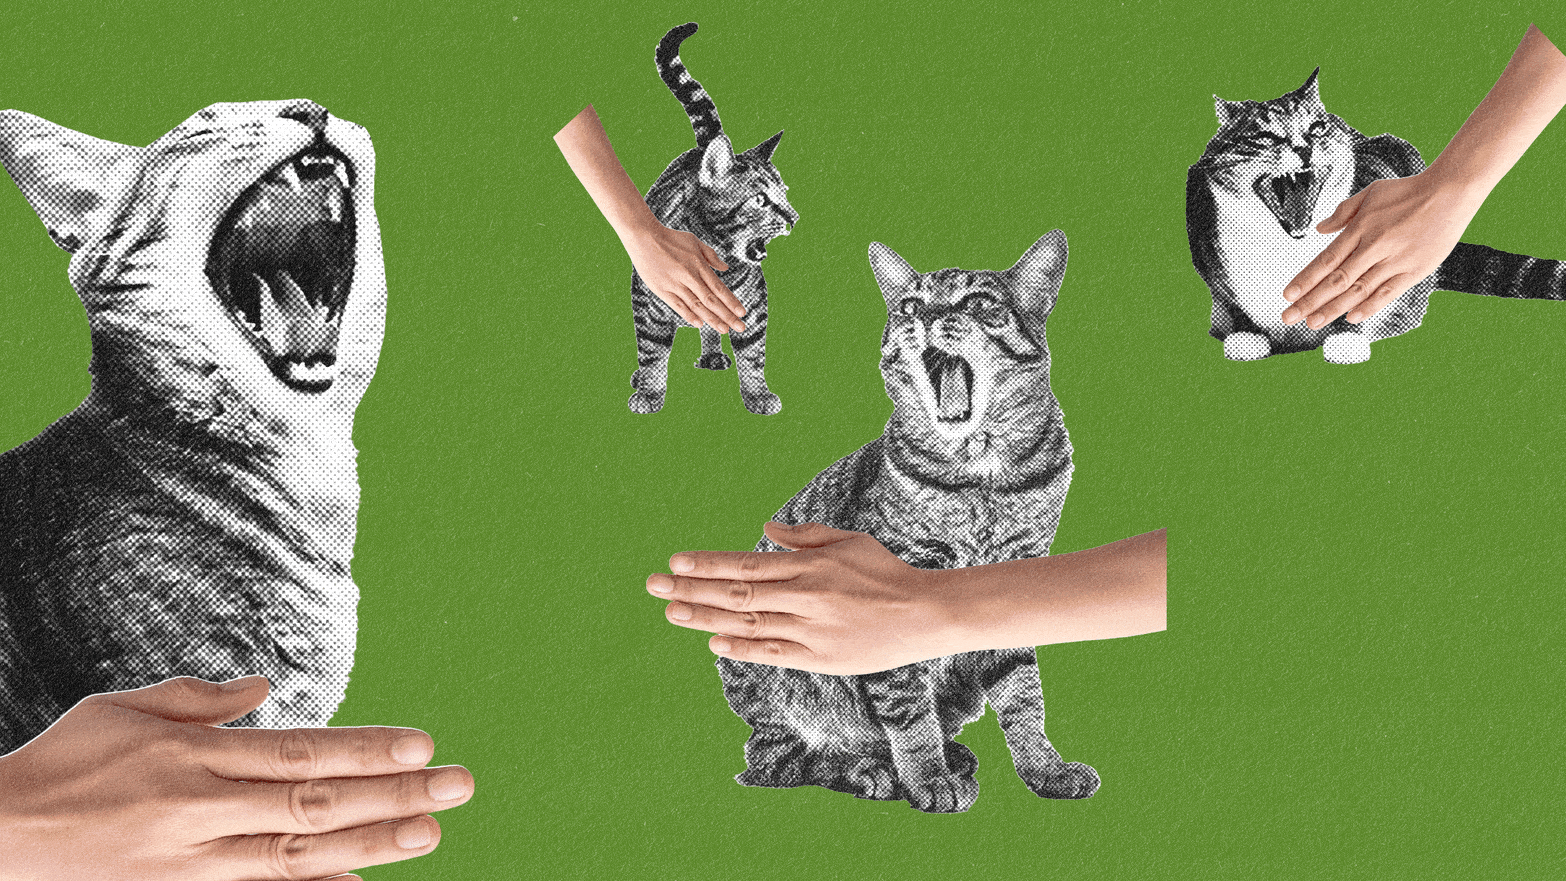 Illustration of cats and hands